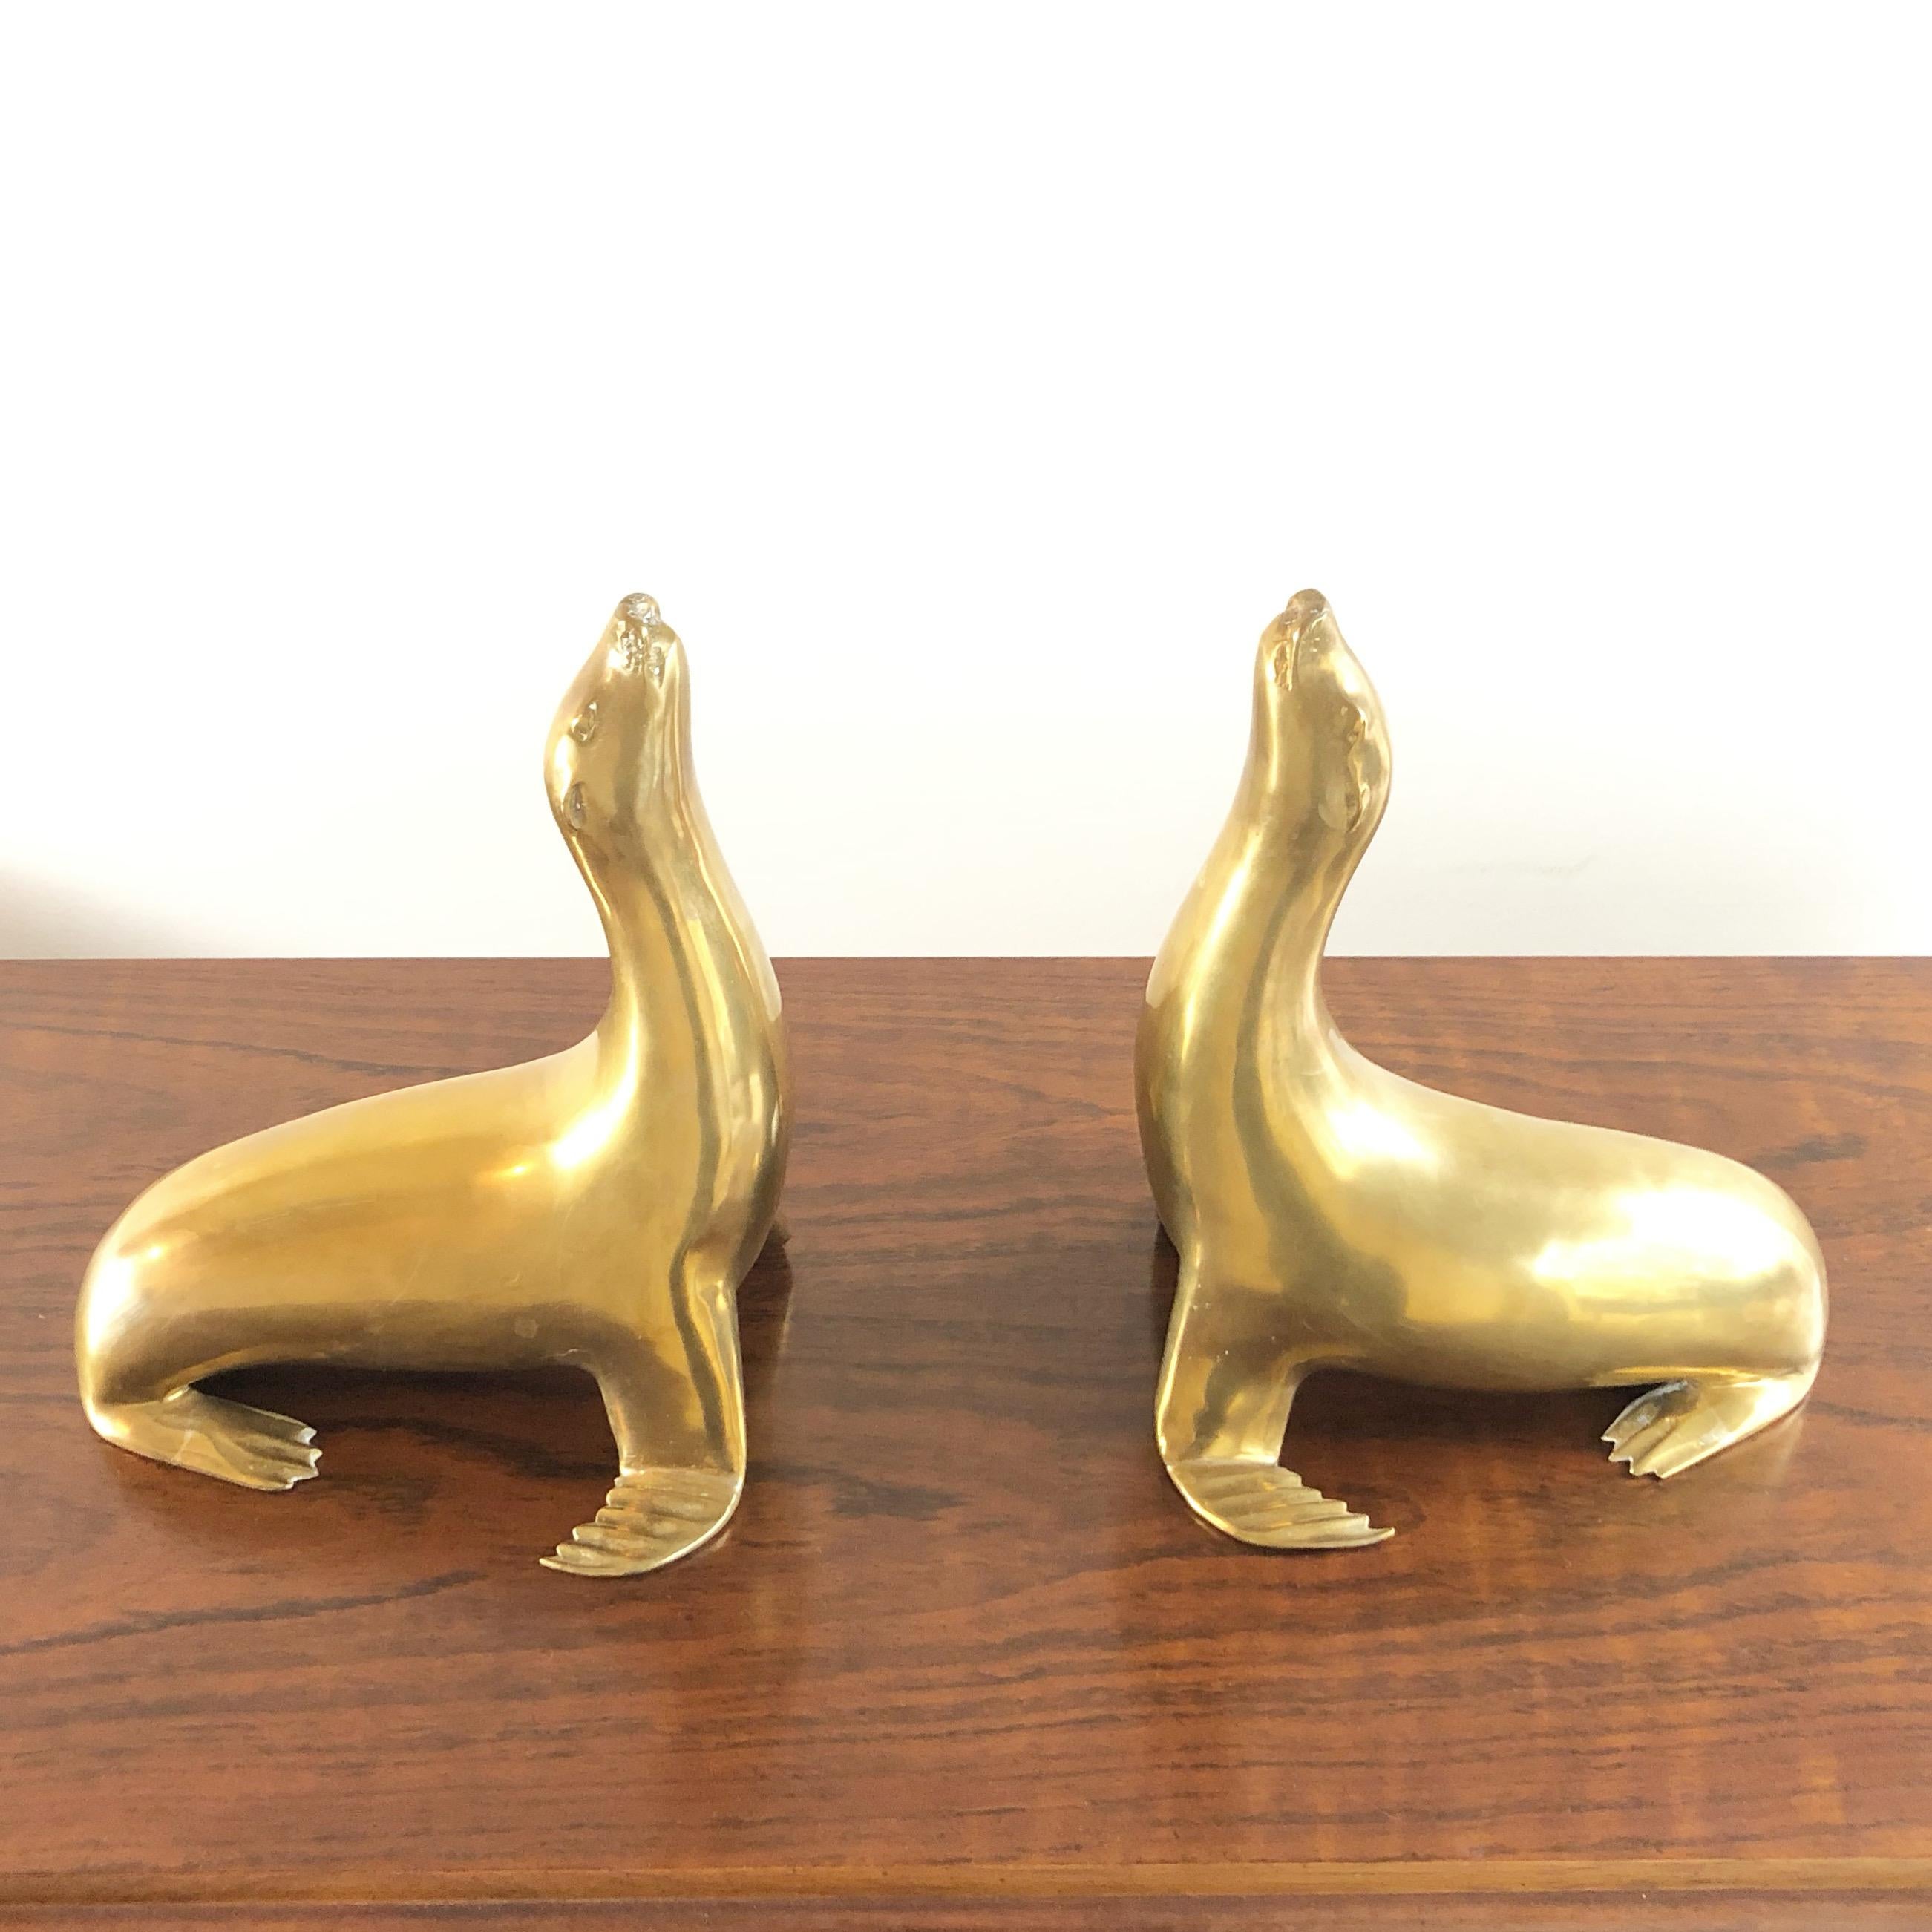 Pair of brass seal sculptures that could also be used as bookends.